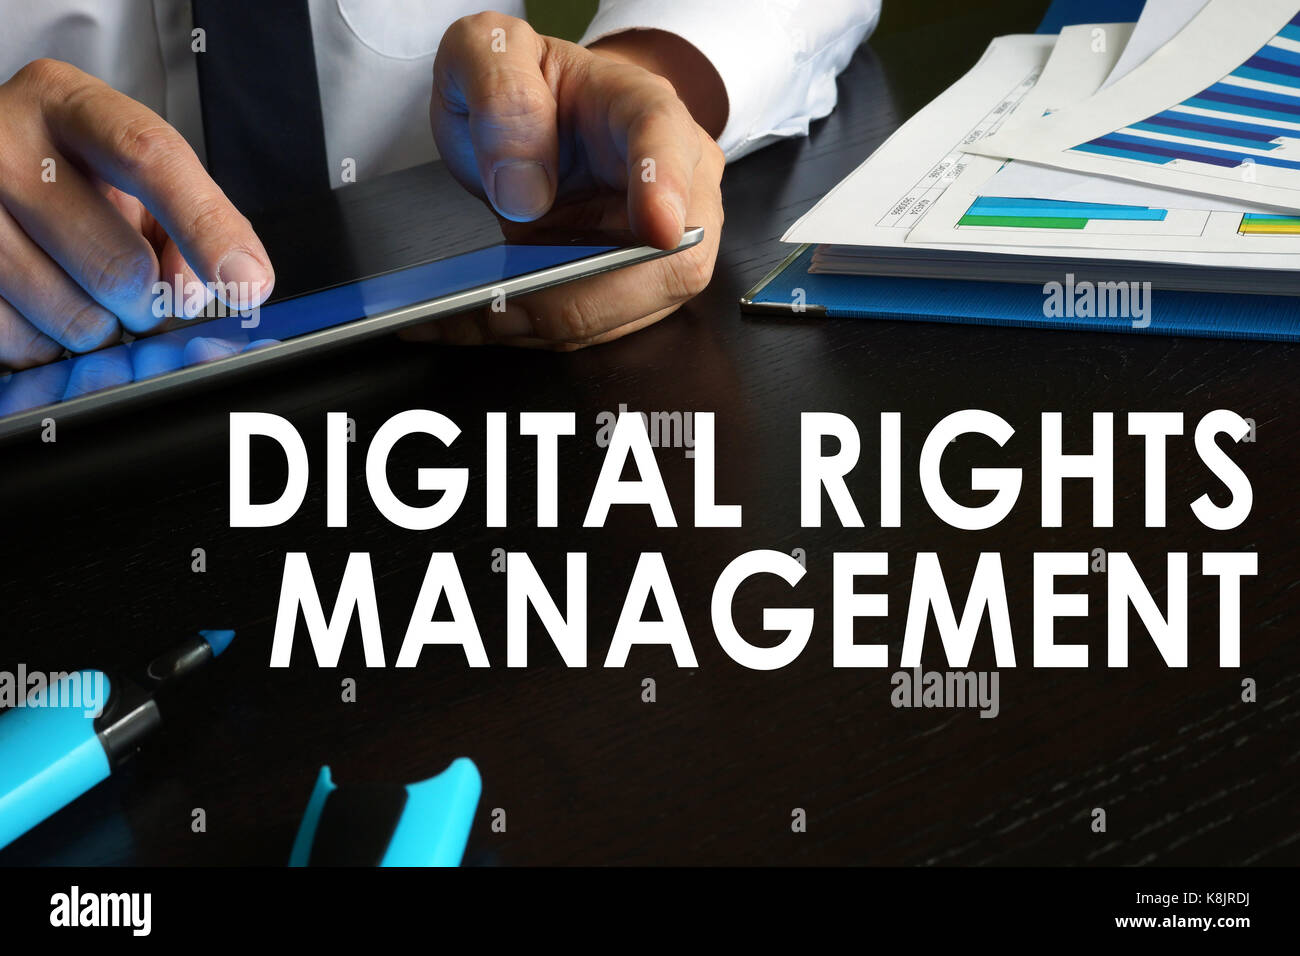 Digital rights management concept. Man is using tablet. Stock Photo